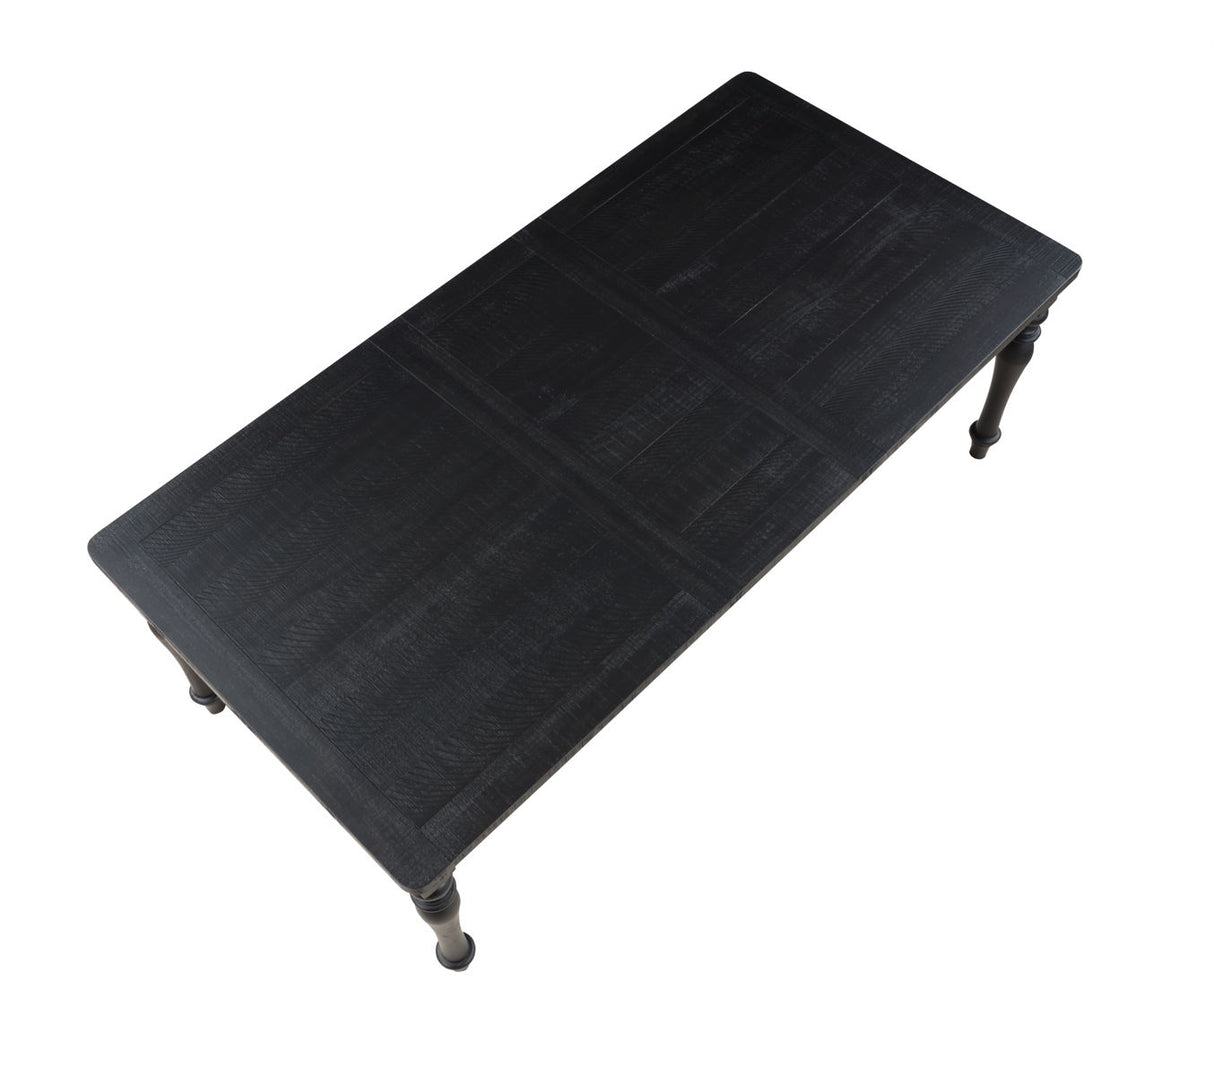 Odessa - Dining Table With Leaf - Black